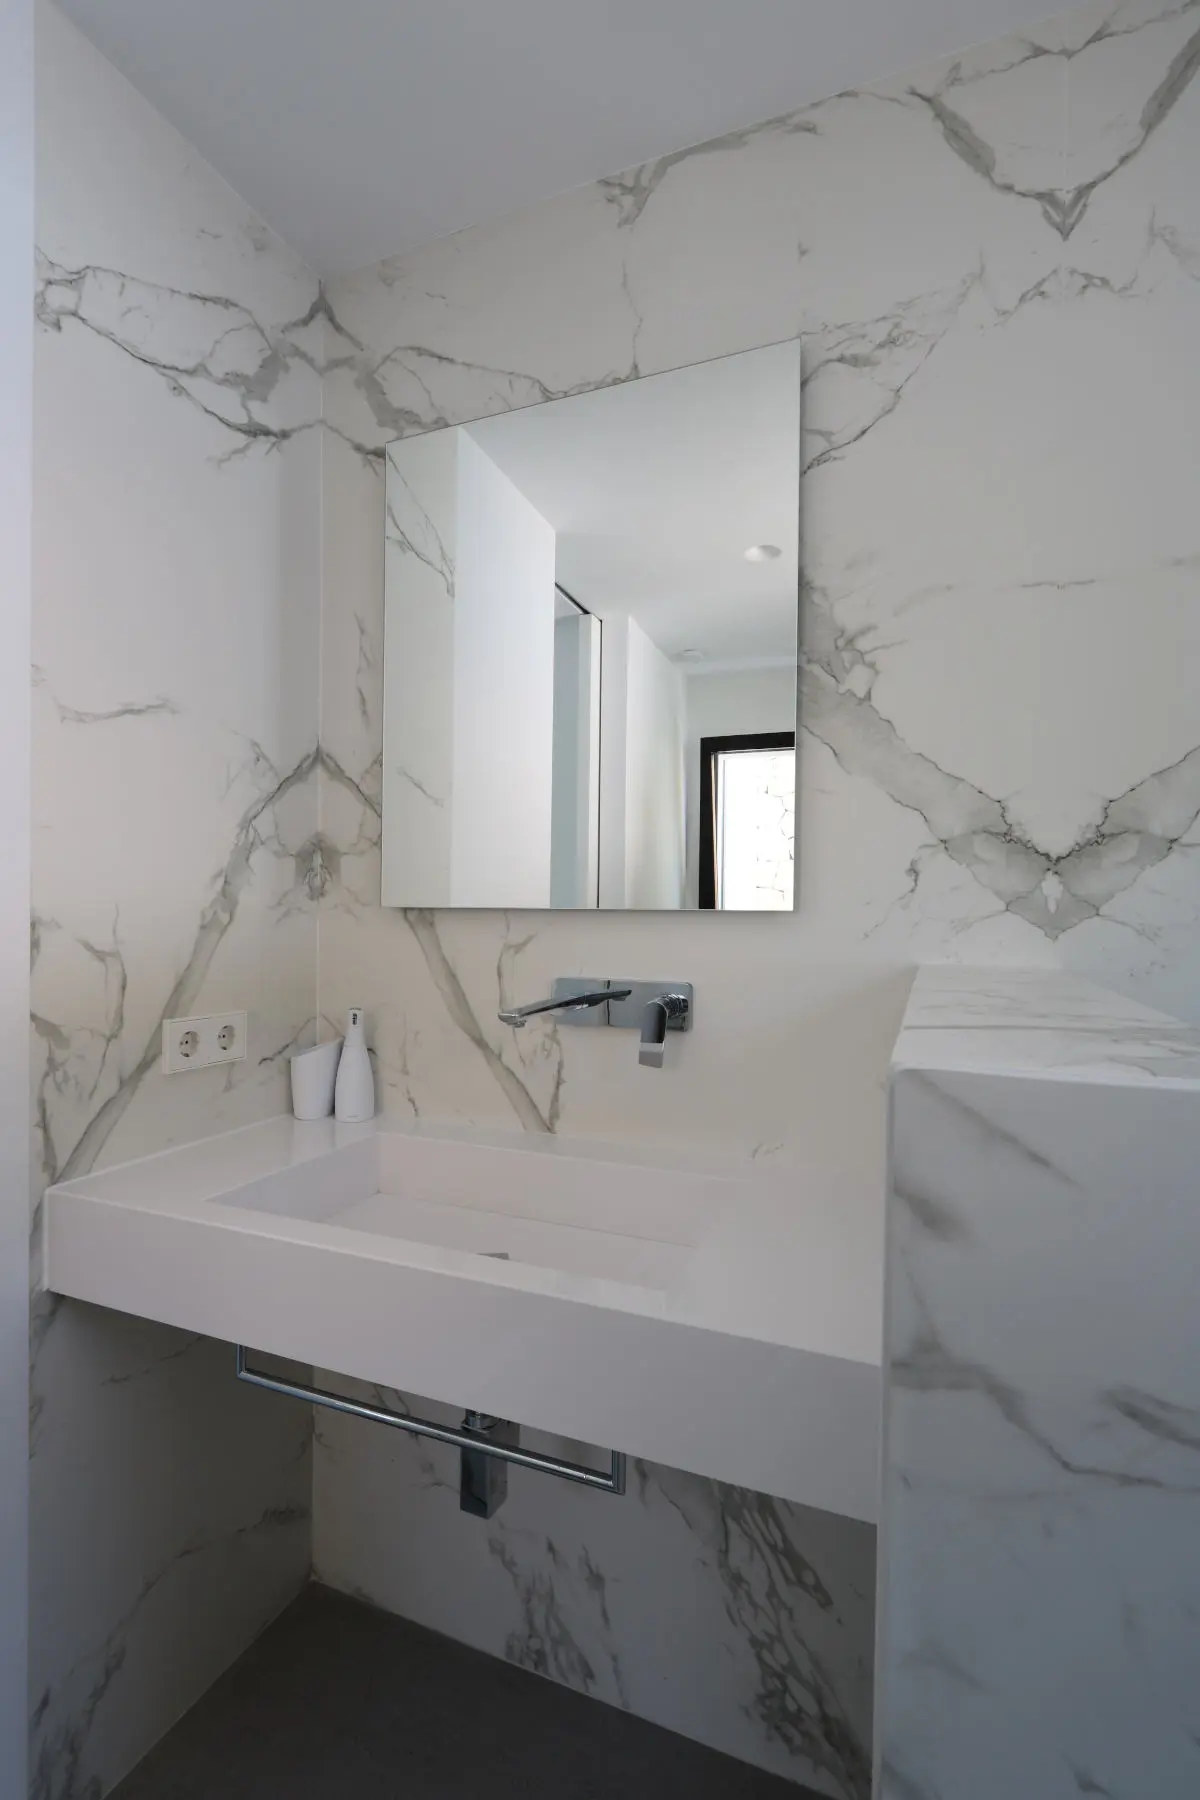 Image of Aura cladding and elegance sink in Desing and functionality in the Balearic Islands - Cosentino